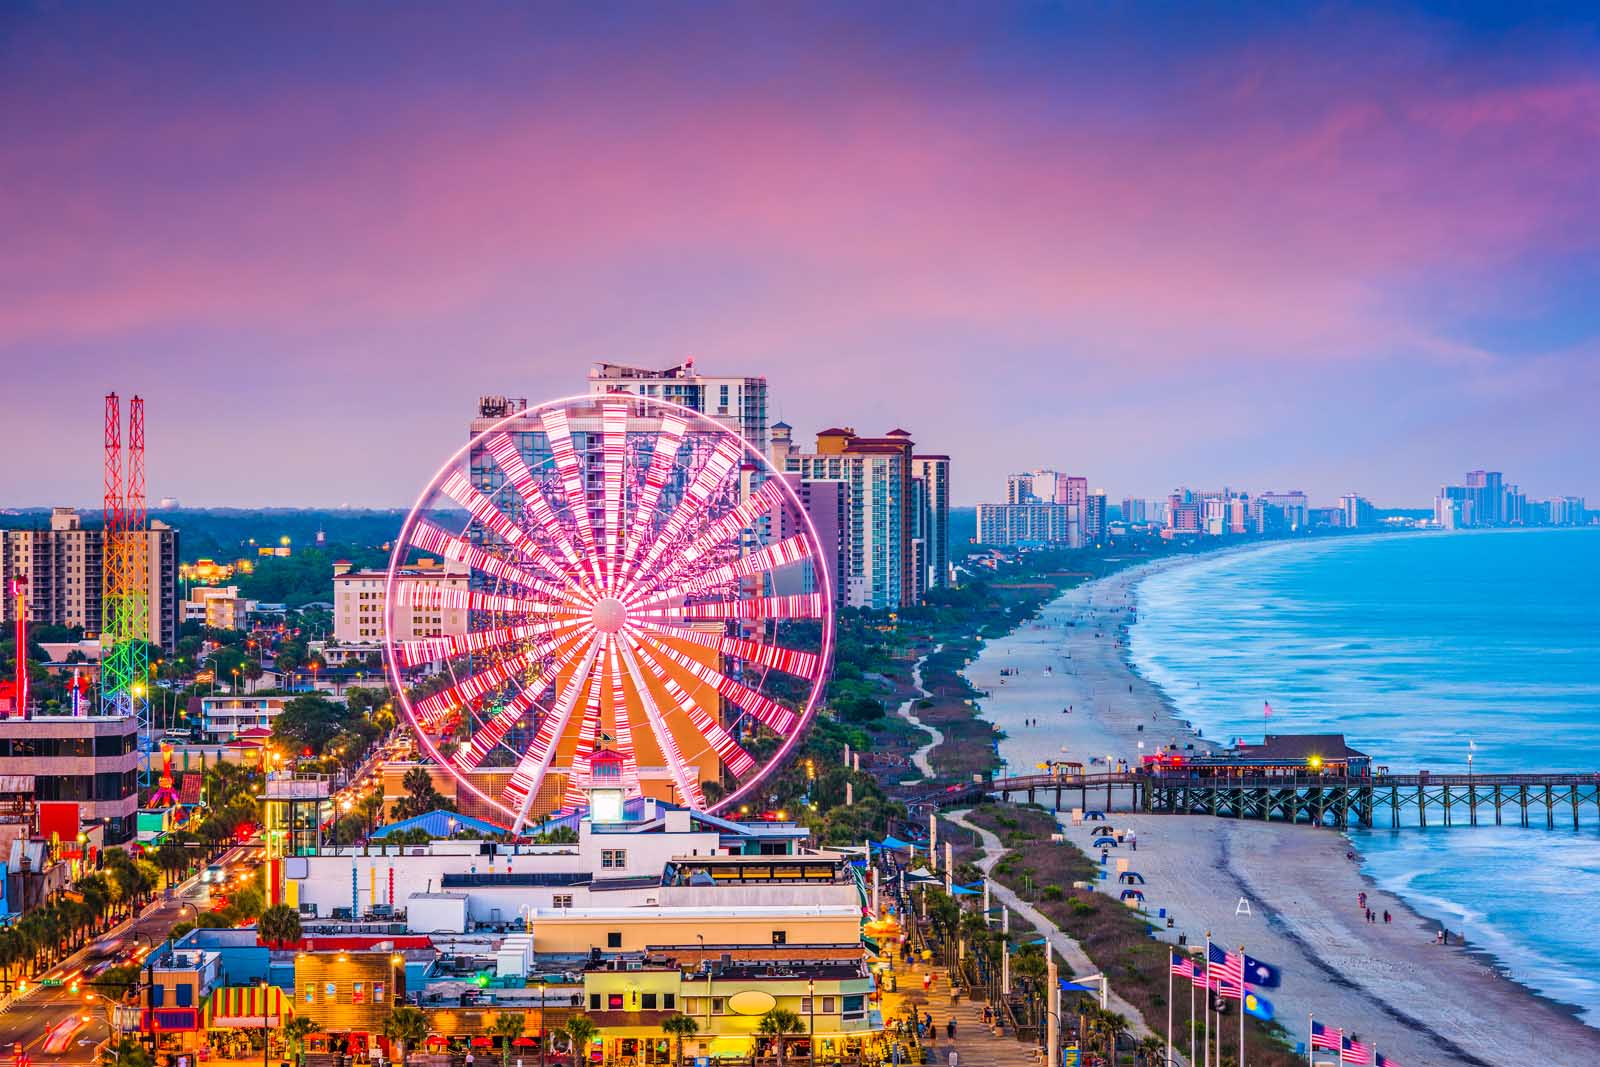 32 Best Things to do in Myrtle Beach, South Carolina - The Planet D